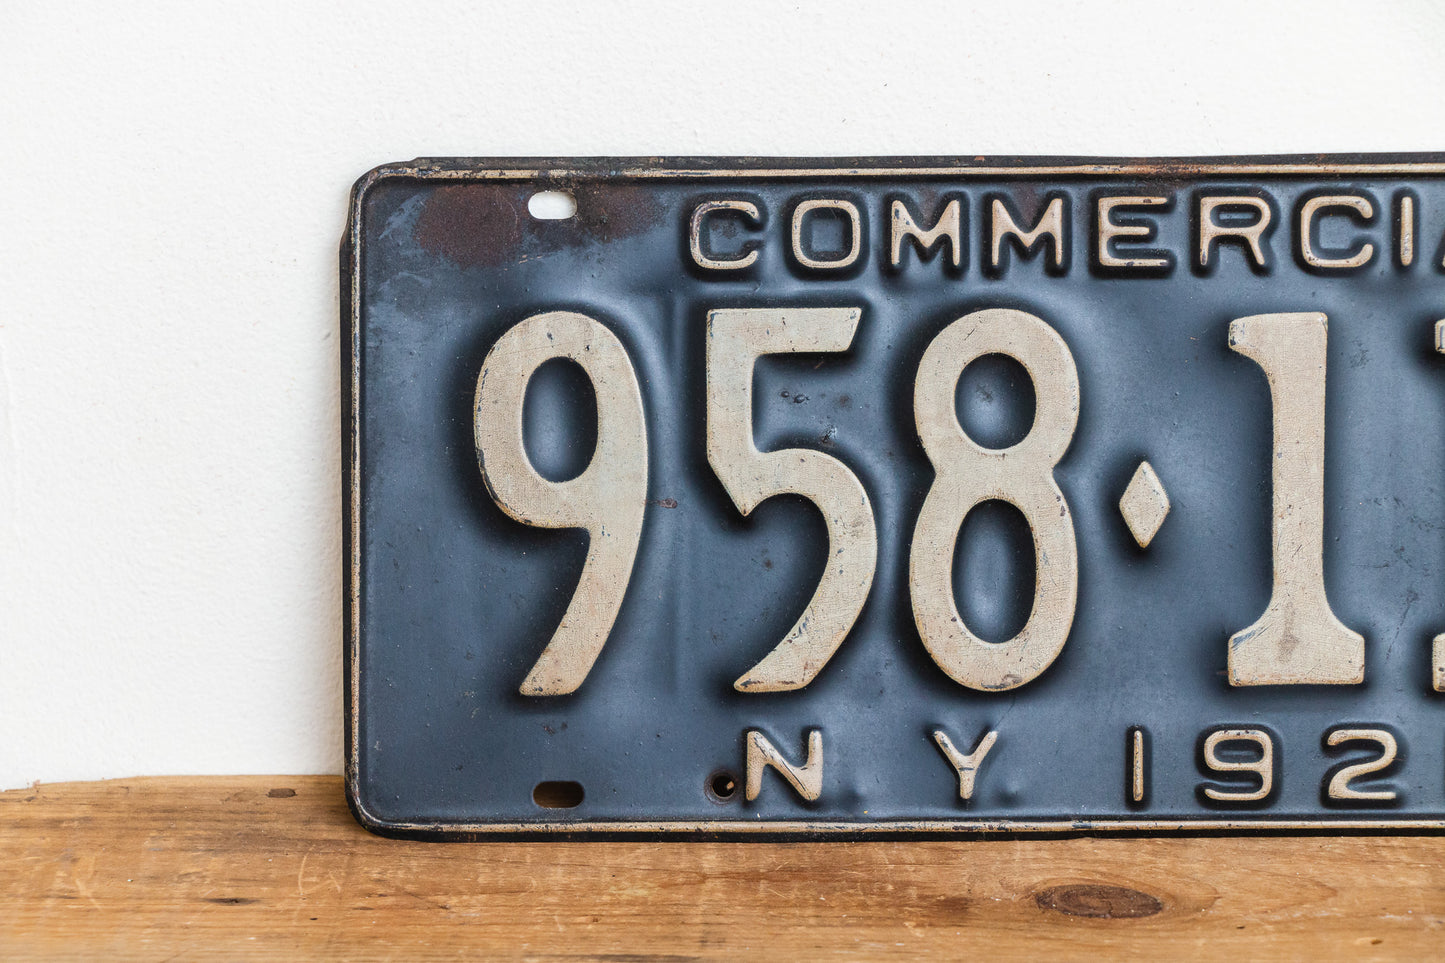 1926 Commercial New York License Plate Vintage Truck Wall Hanging Decor - Eagle's Eye Finds